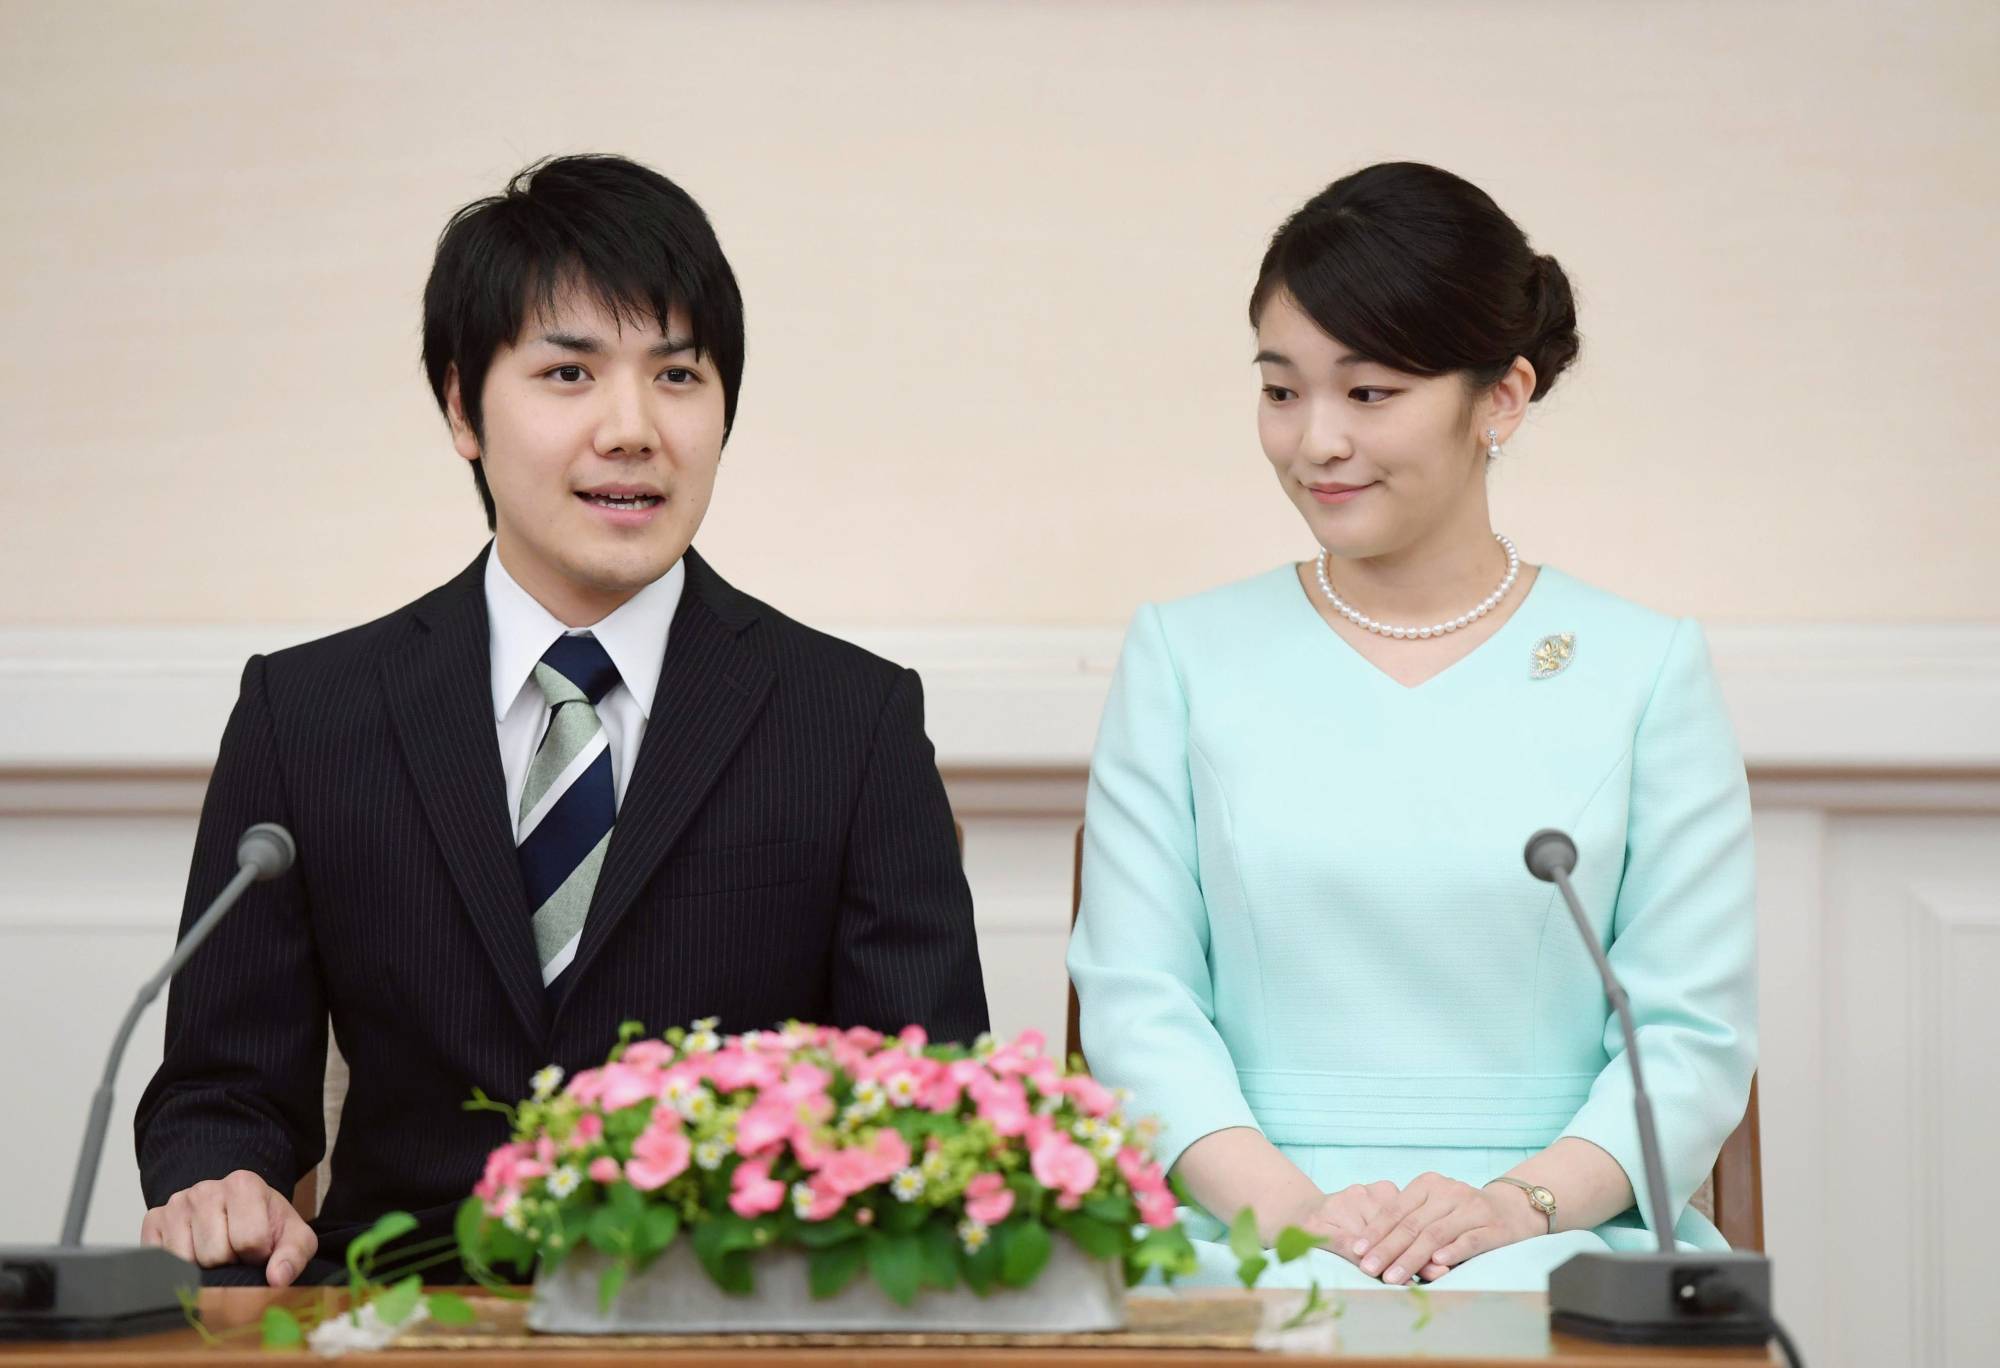 Kei Komuro (left) speaks at a news conference in Tokyo along with Princess Mako in September 2017 after they were unofficially engaged. | KYODO